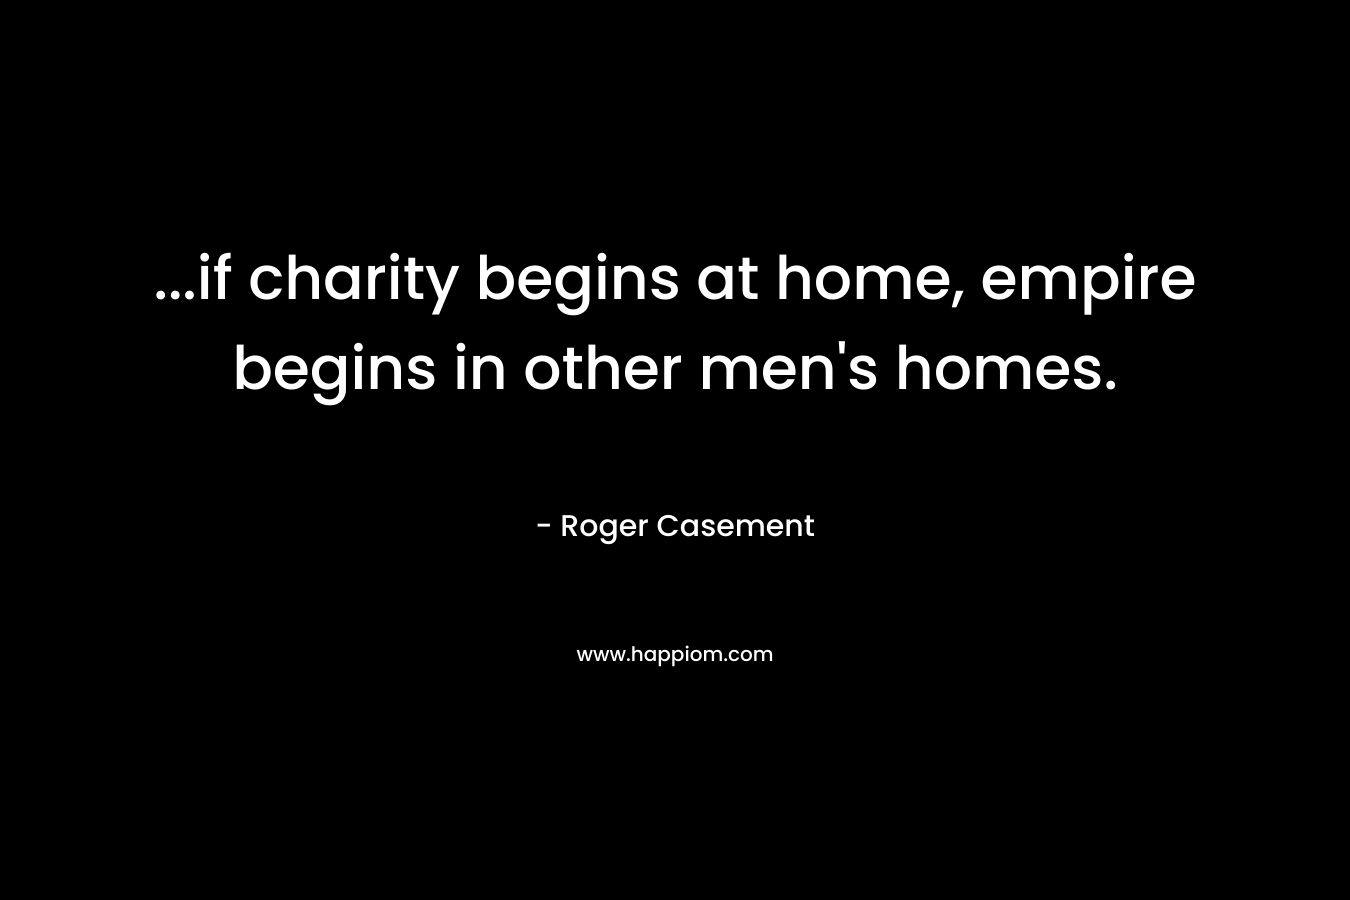 ...if charity begins at home, empire begins in other men's homes.